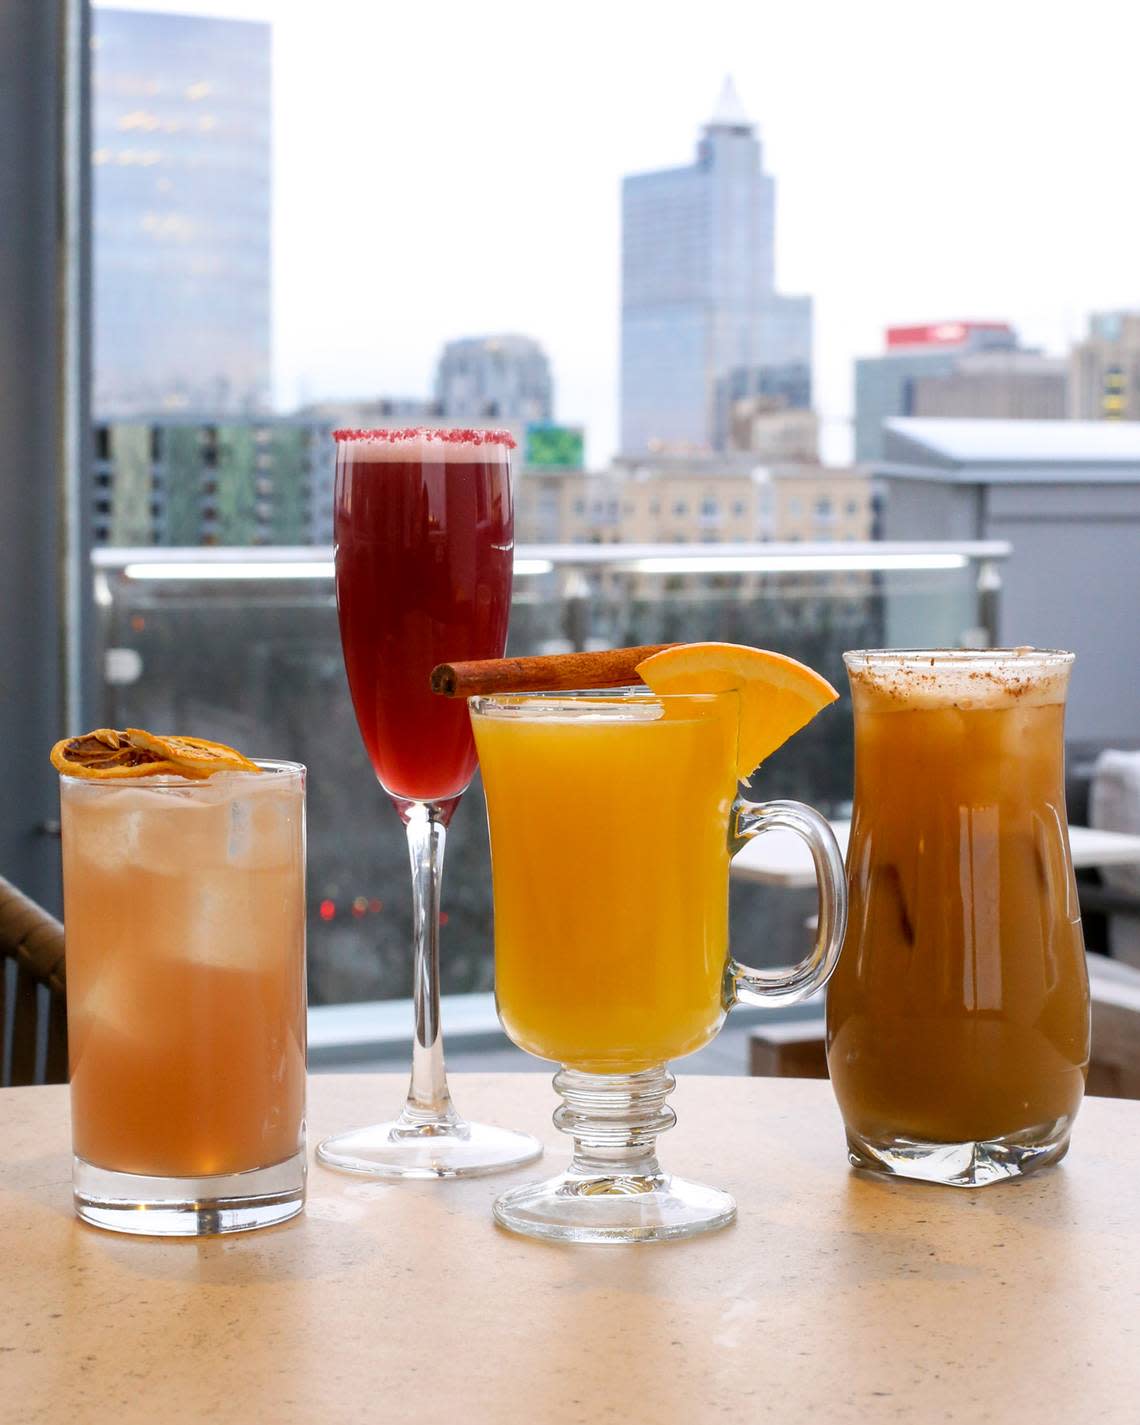 A new menu of “mocktails” will be served The Willard Rooftop Lounge in Raleigh during Dry January.